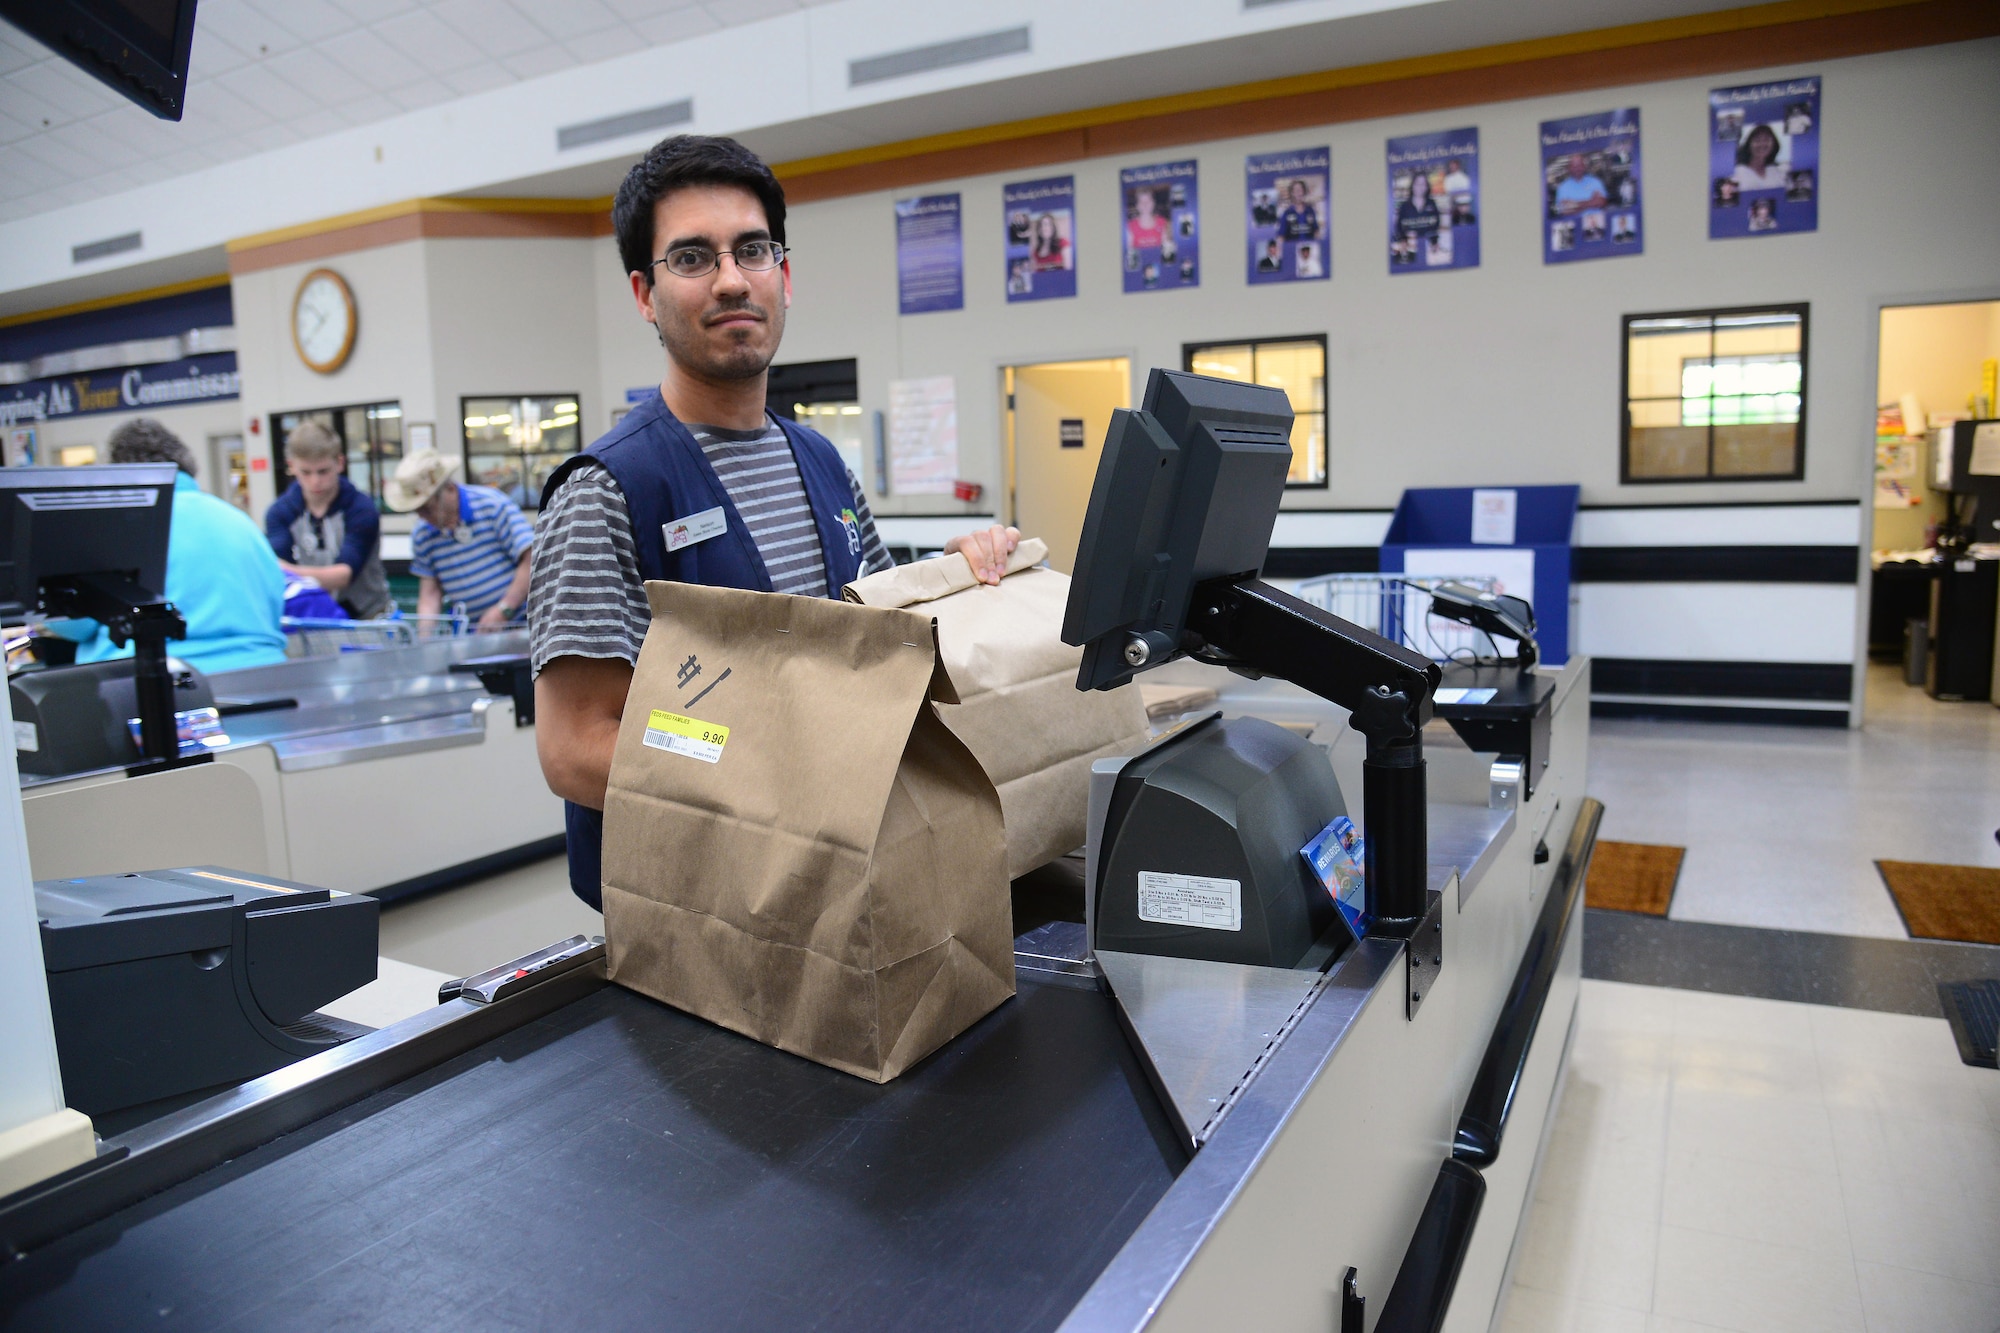 A commissary teller rings up a customer’s purchase of two Feds Feed Families donation bags June 29, 2017, at Malmstrom Air Force Base, Mont. The Malmstrom Commissary acts as a direct link between the donating customers and the local charity for distribution. (U.S. Air Force photo/Senior Airman Magen M. Reeves)